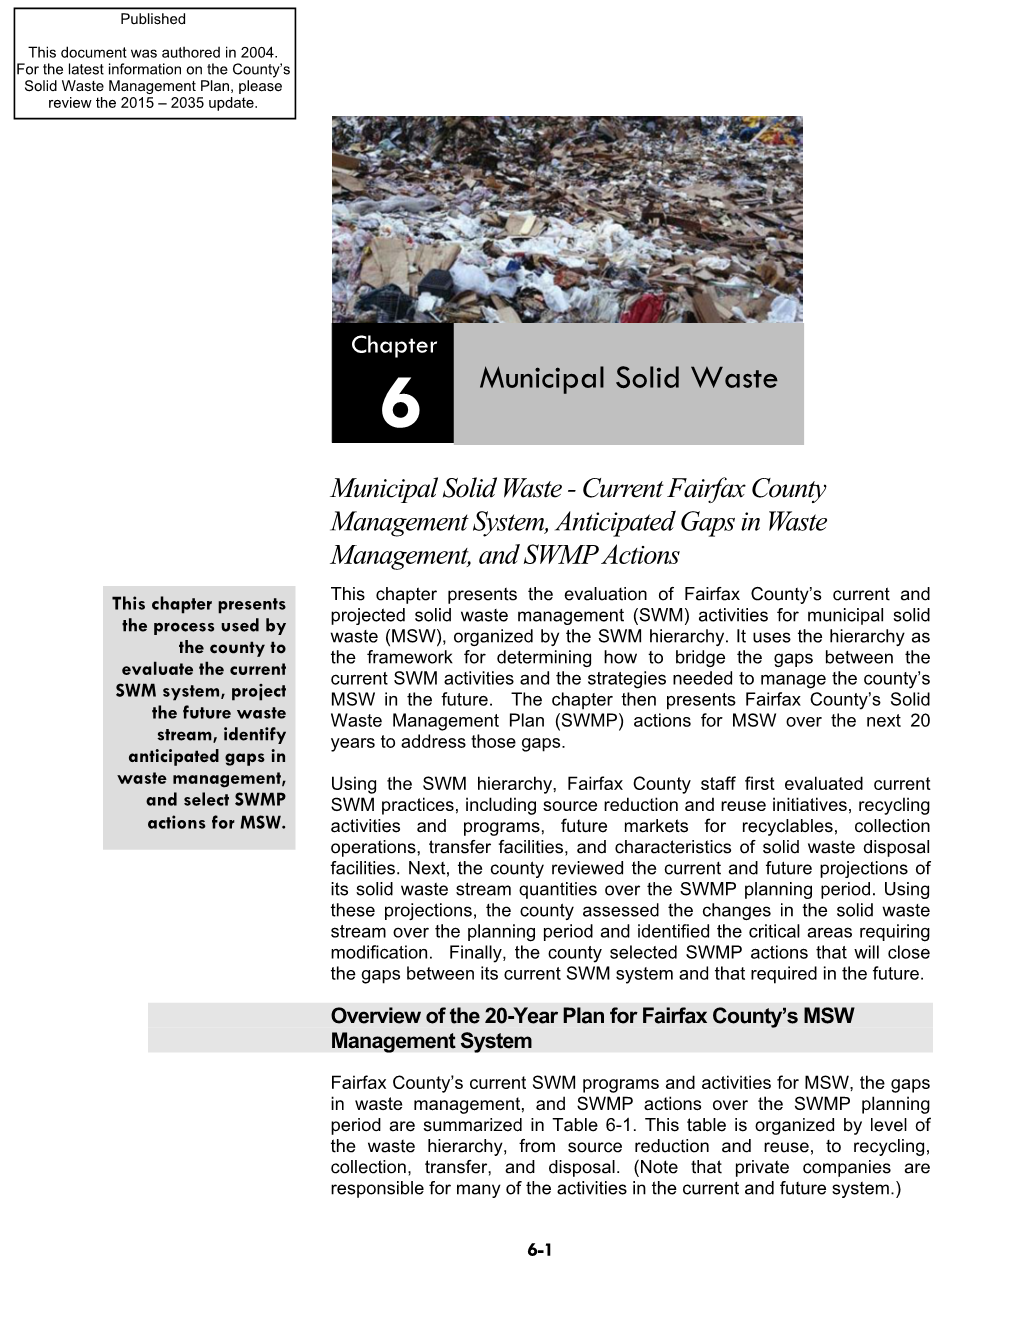 Chapter 6 Municipal Solid Waste